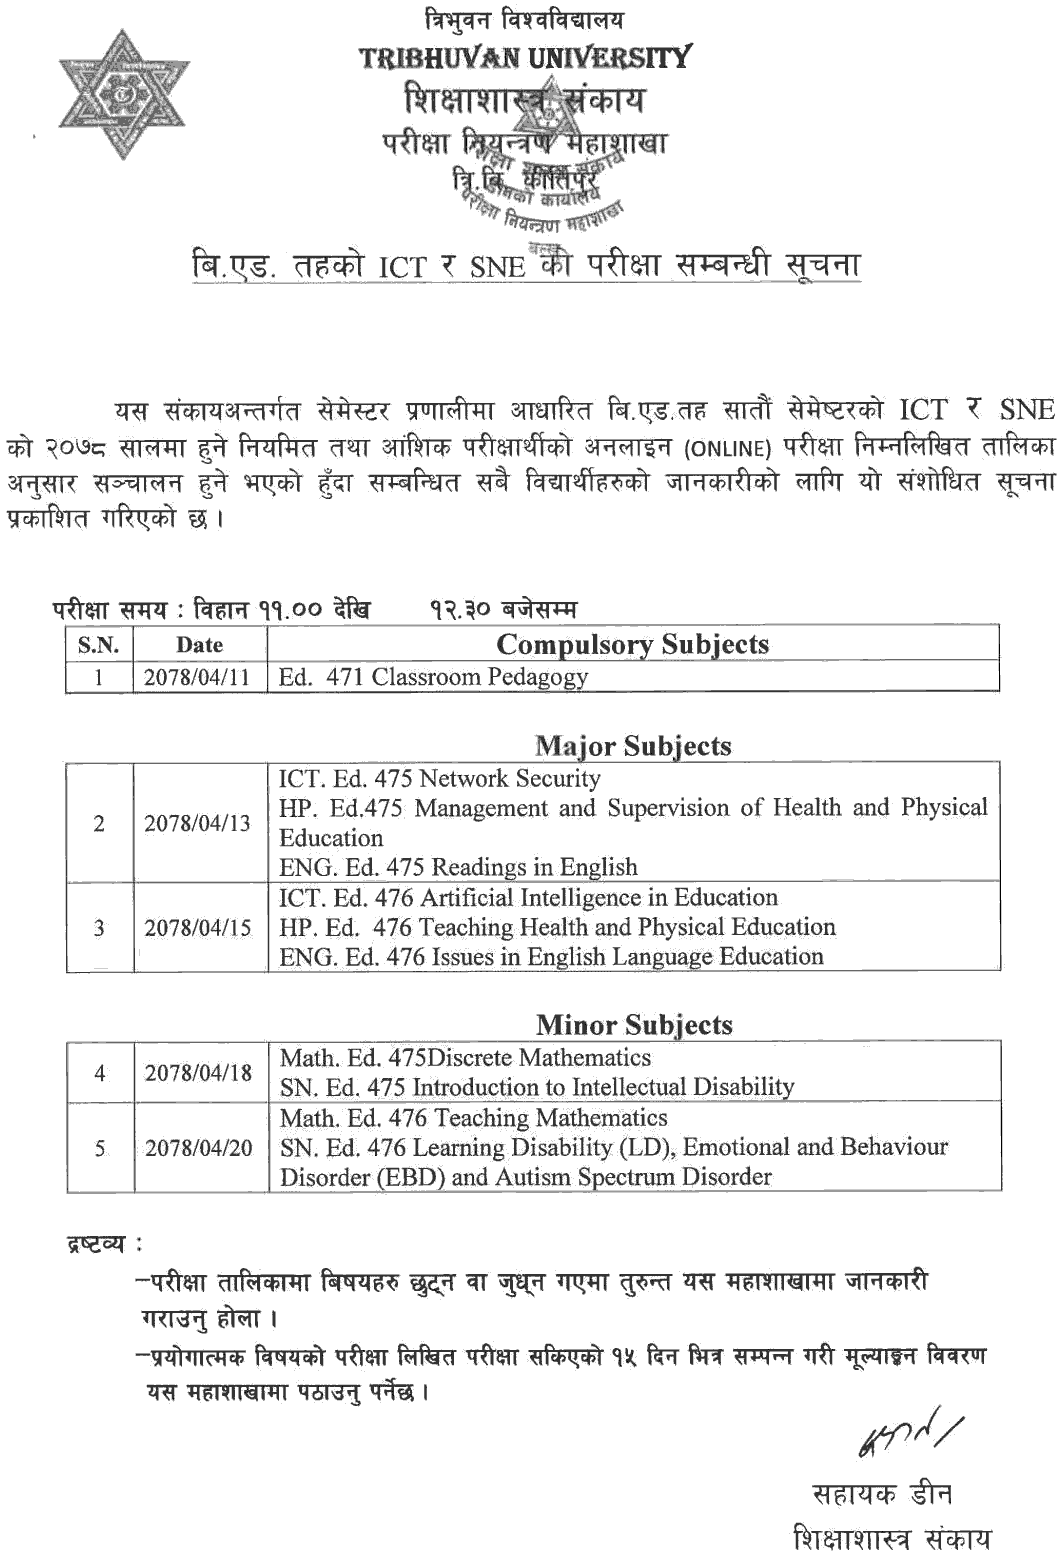 B.Ed ICT and SNE 7th Semester Revised Examination Schedule